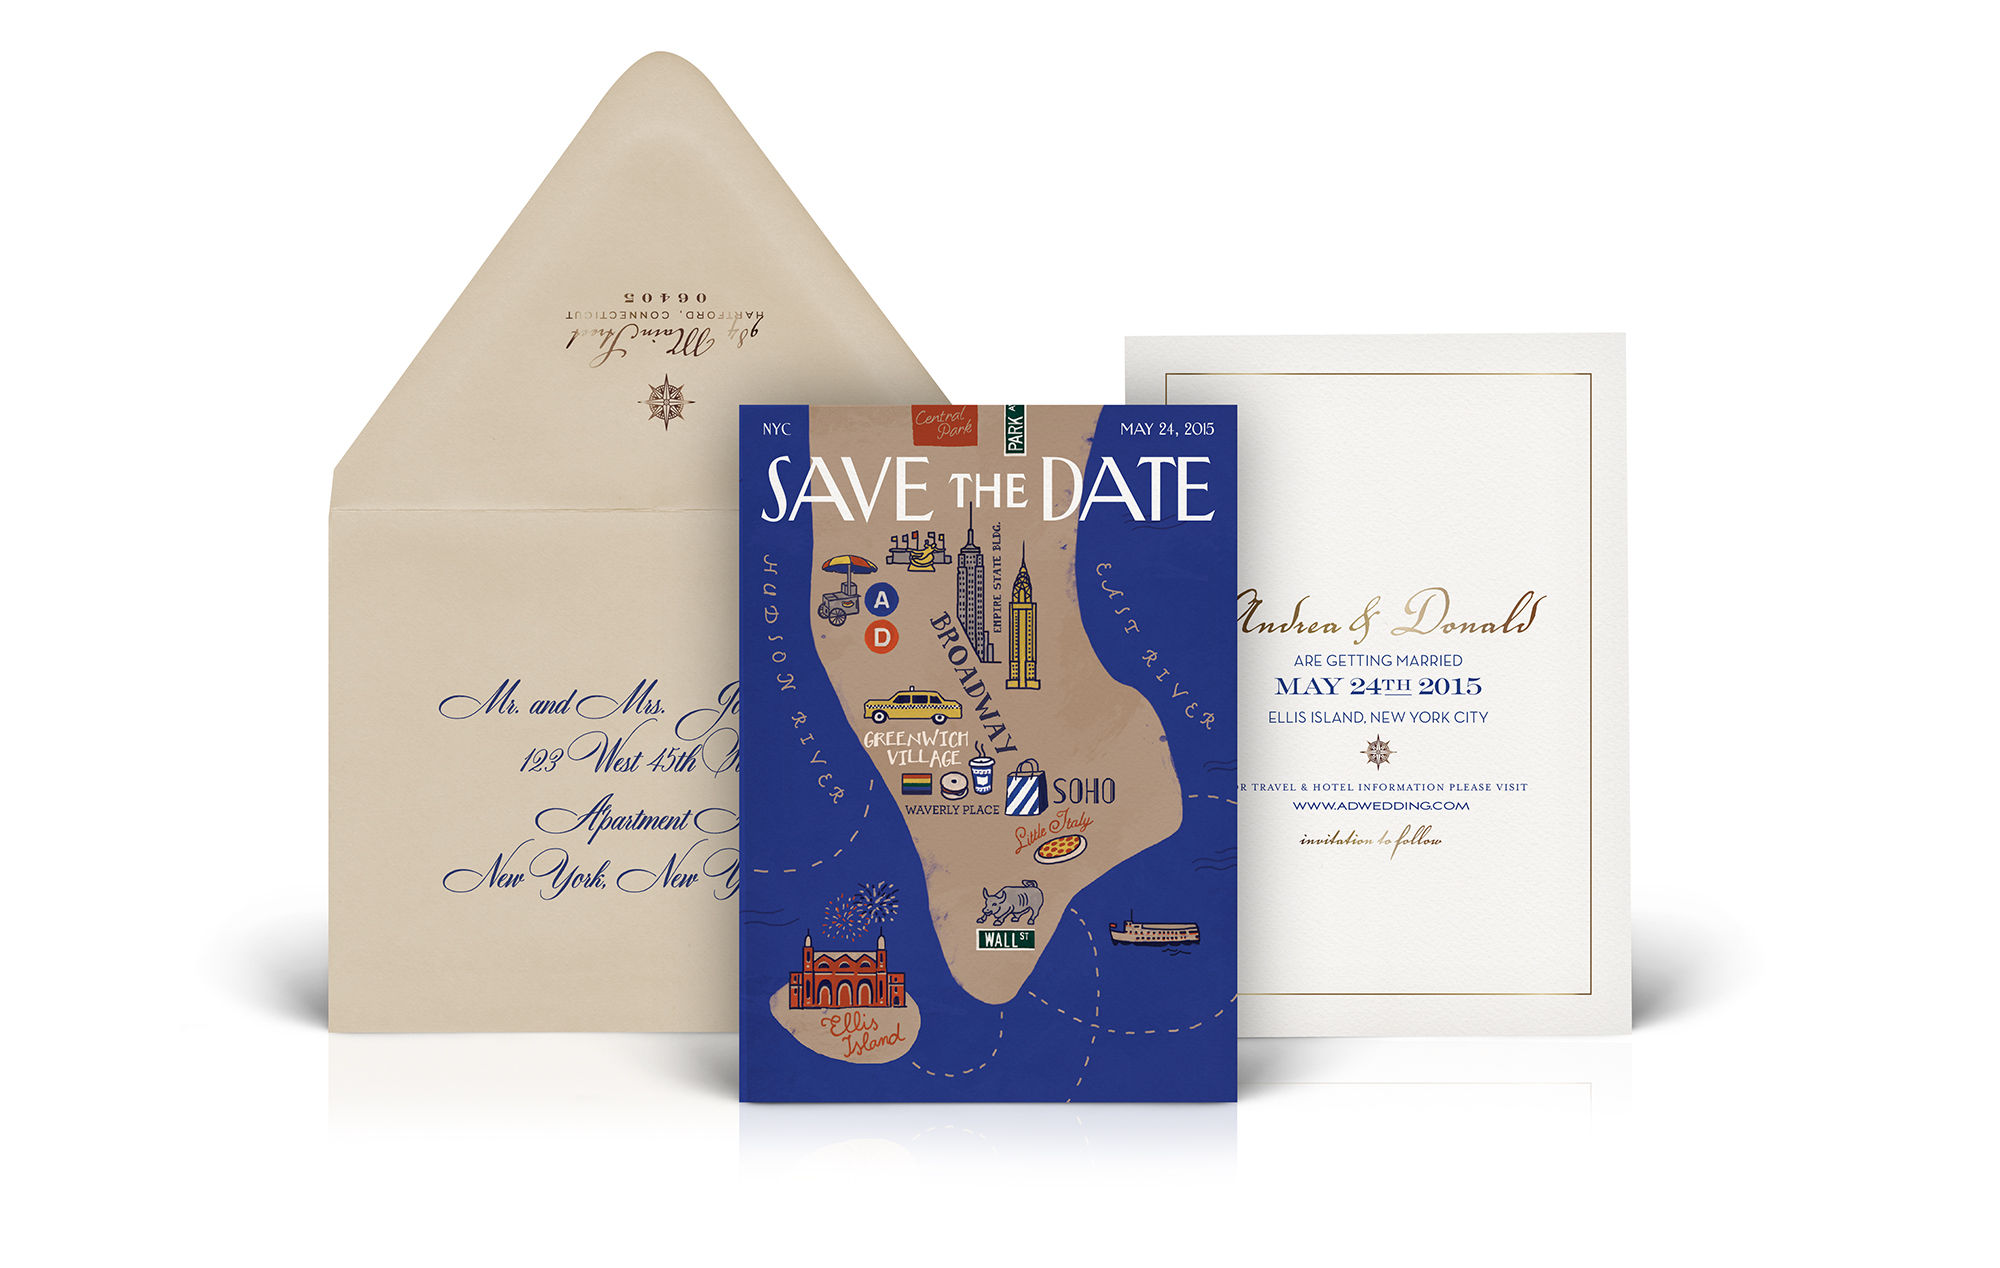 The New Yorker magazine inspired save the date